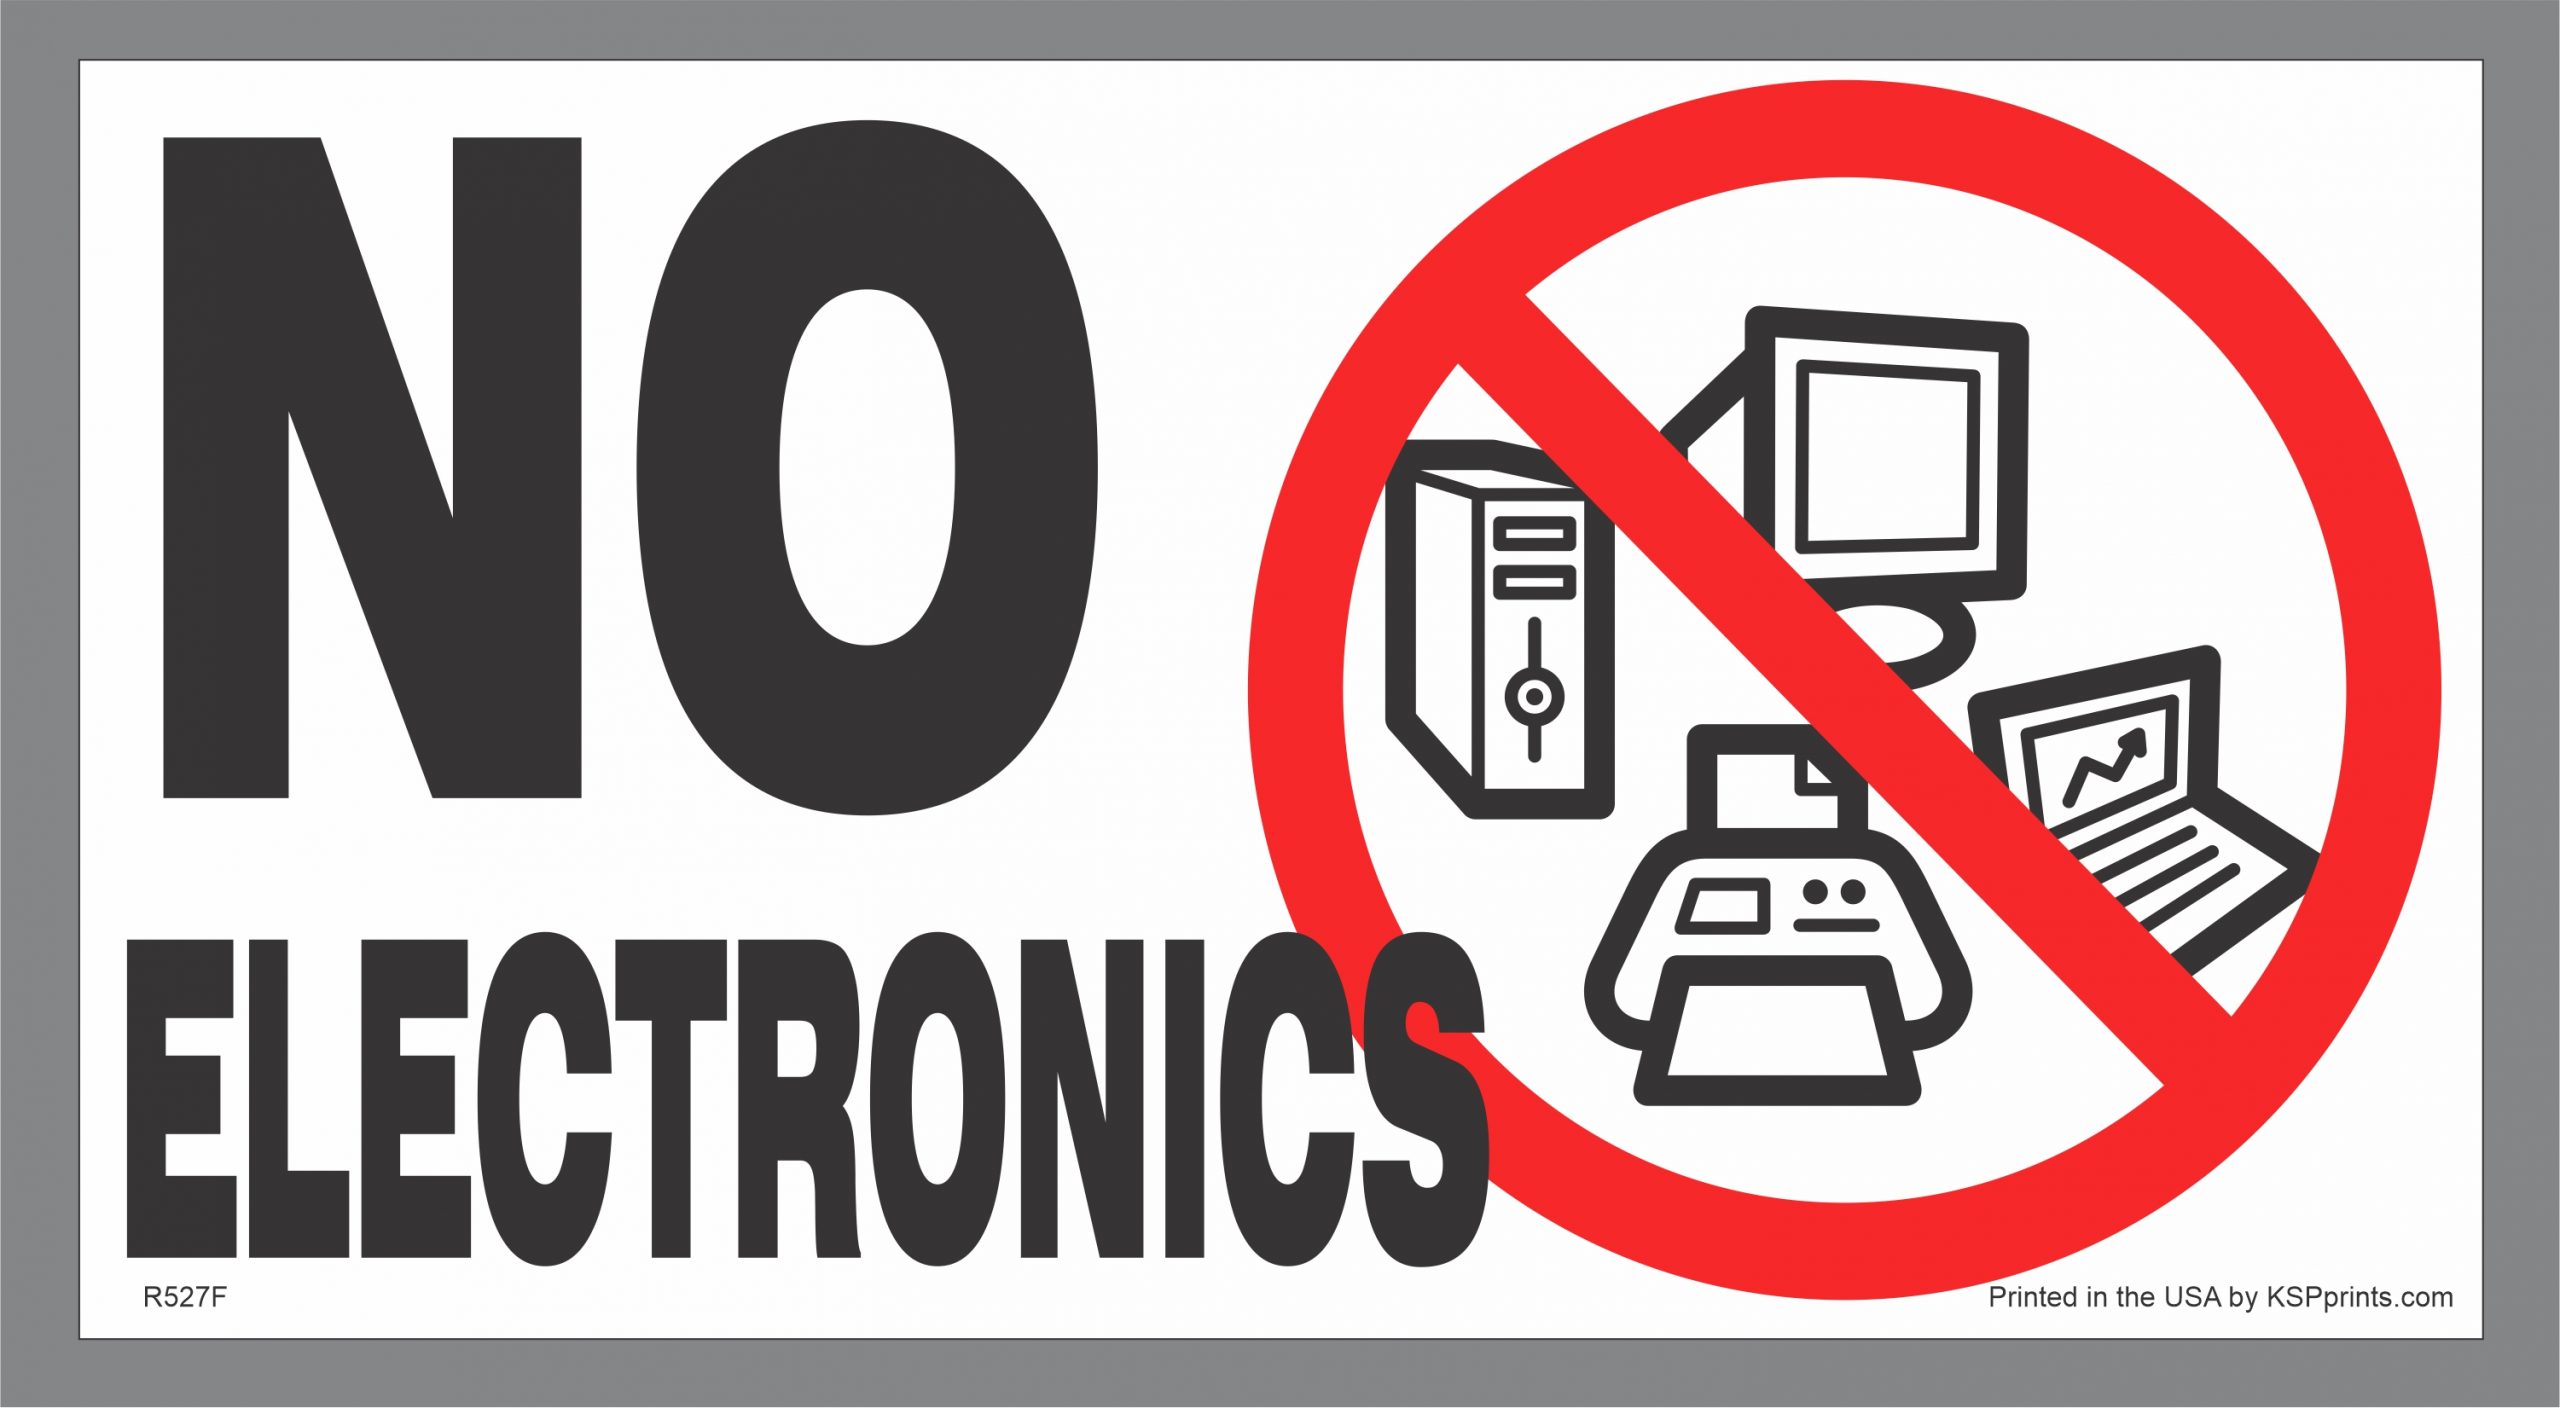 No Electronics Sticker for Keeping Waste Streams Separate